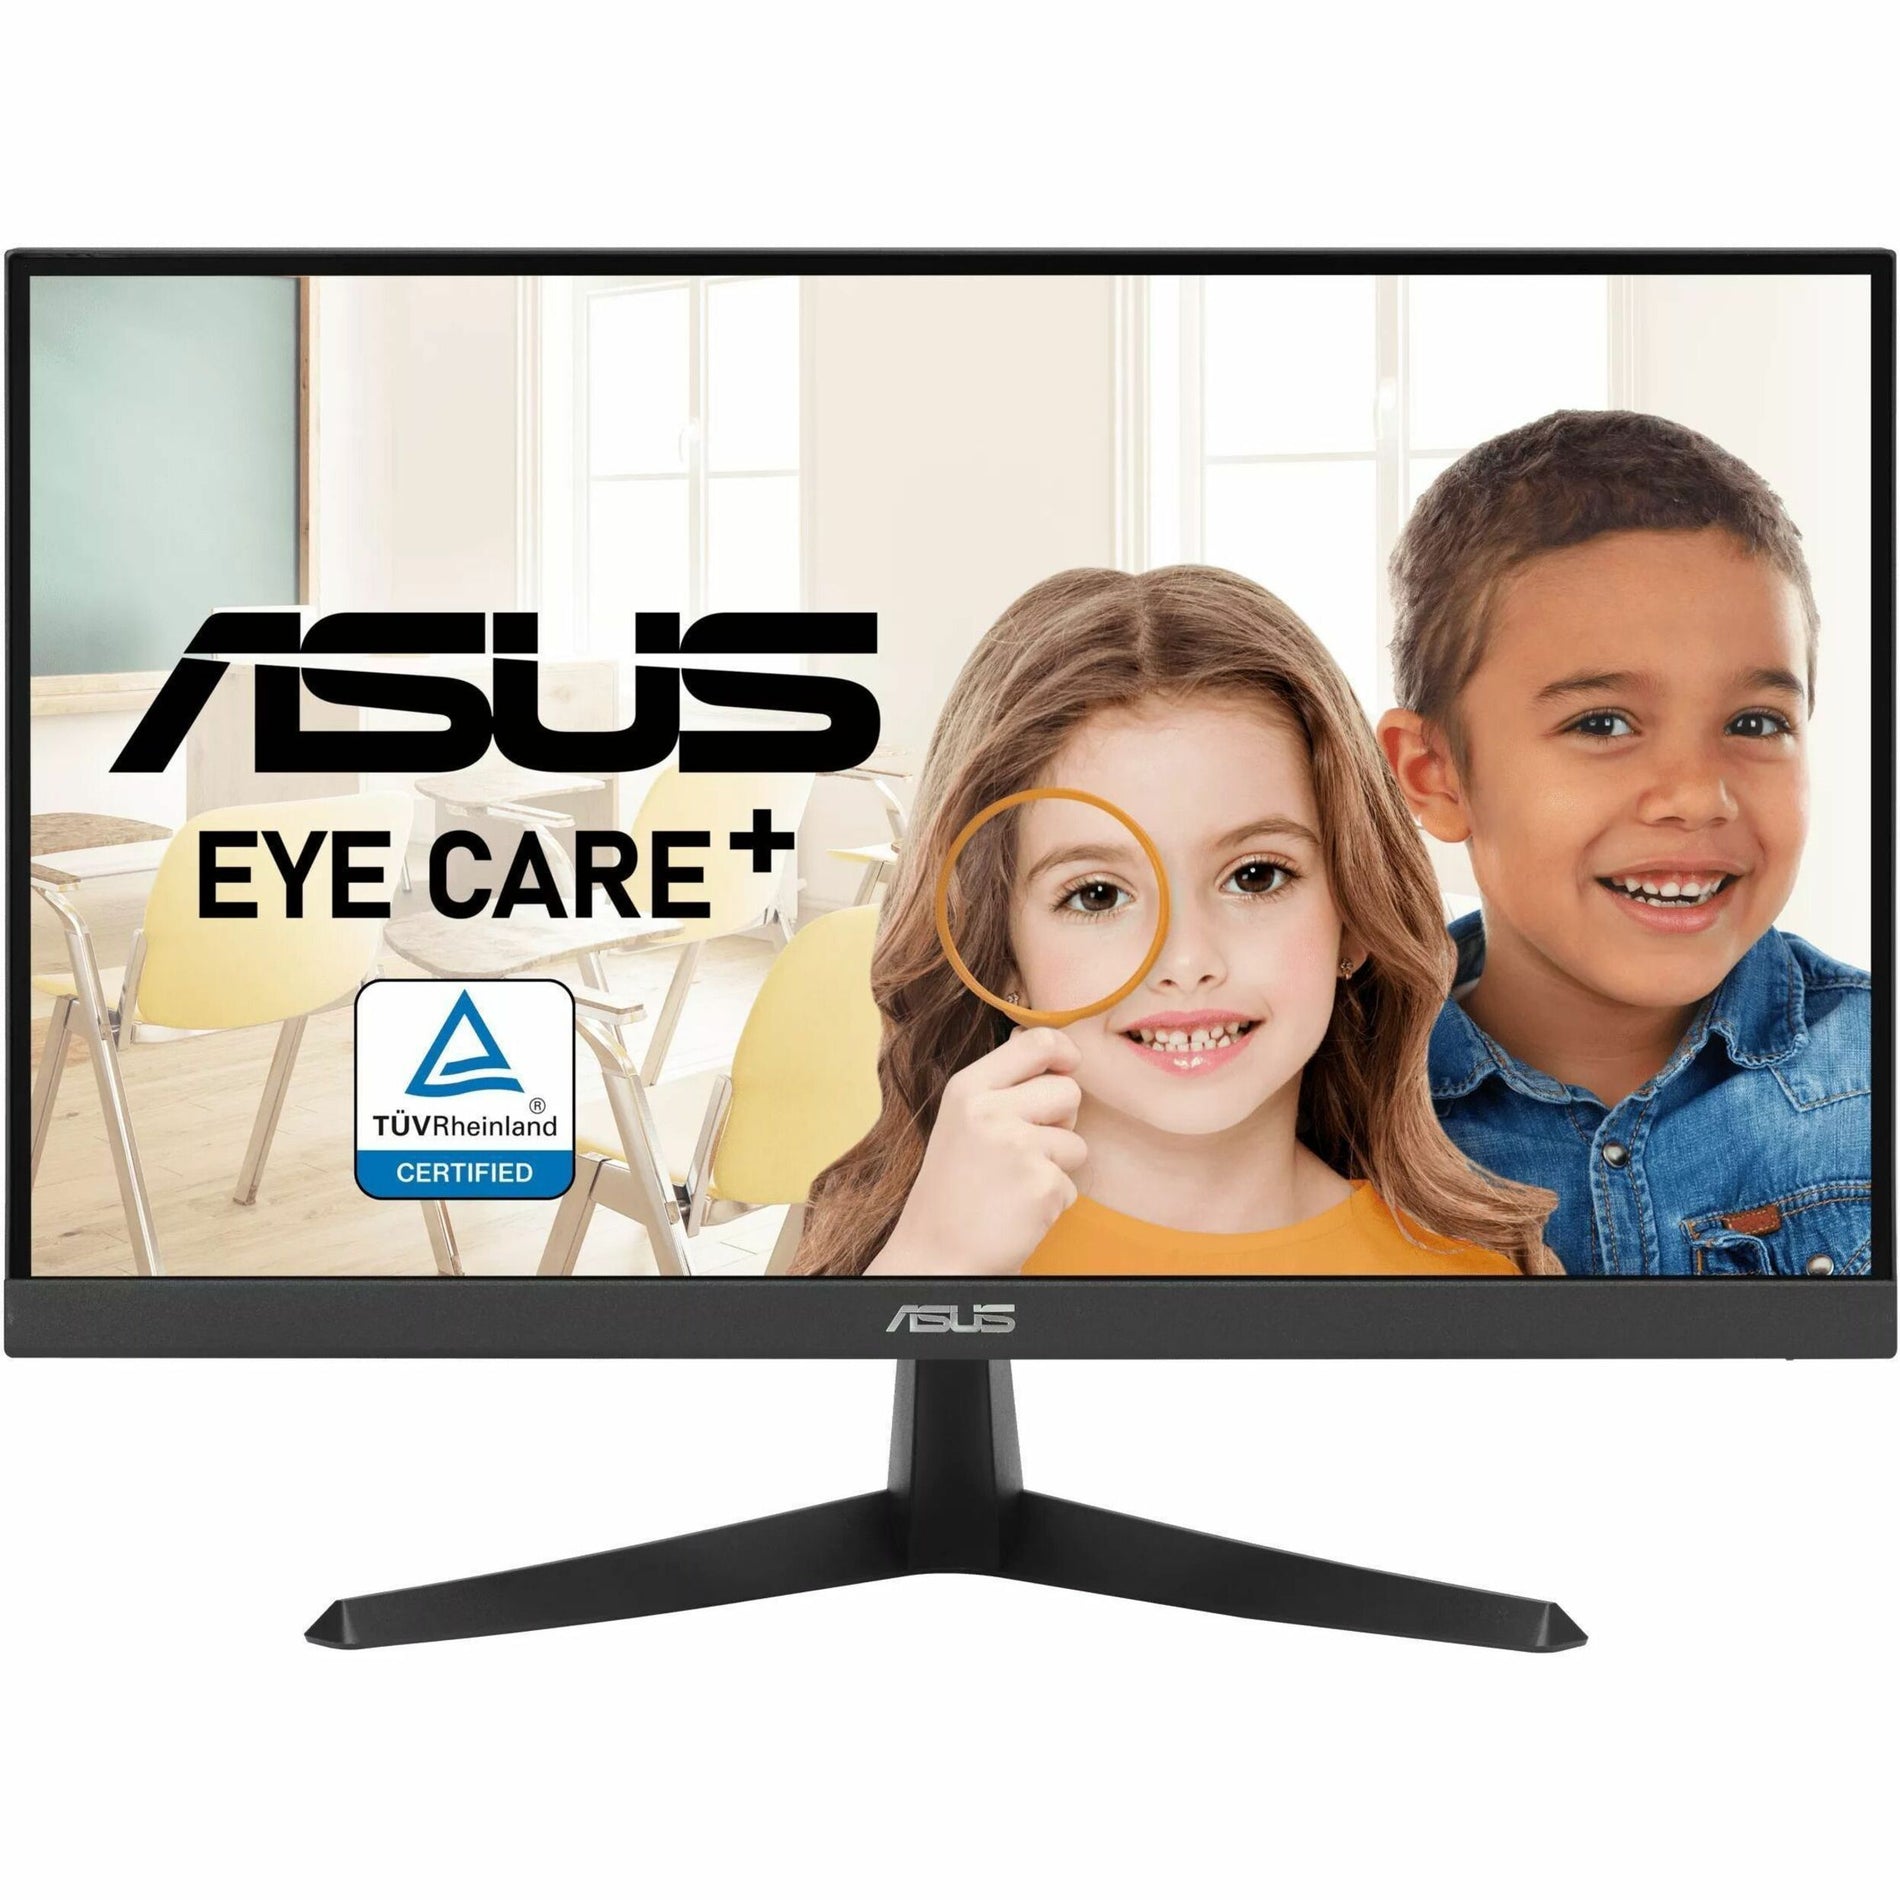 Asus VY229HE Full HD LED Monitor - 16:9, 22" IPS Panel, 1ms Response Time, Adaptive Sync